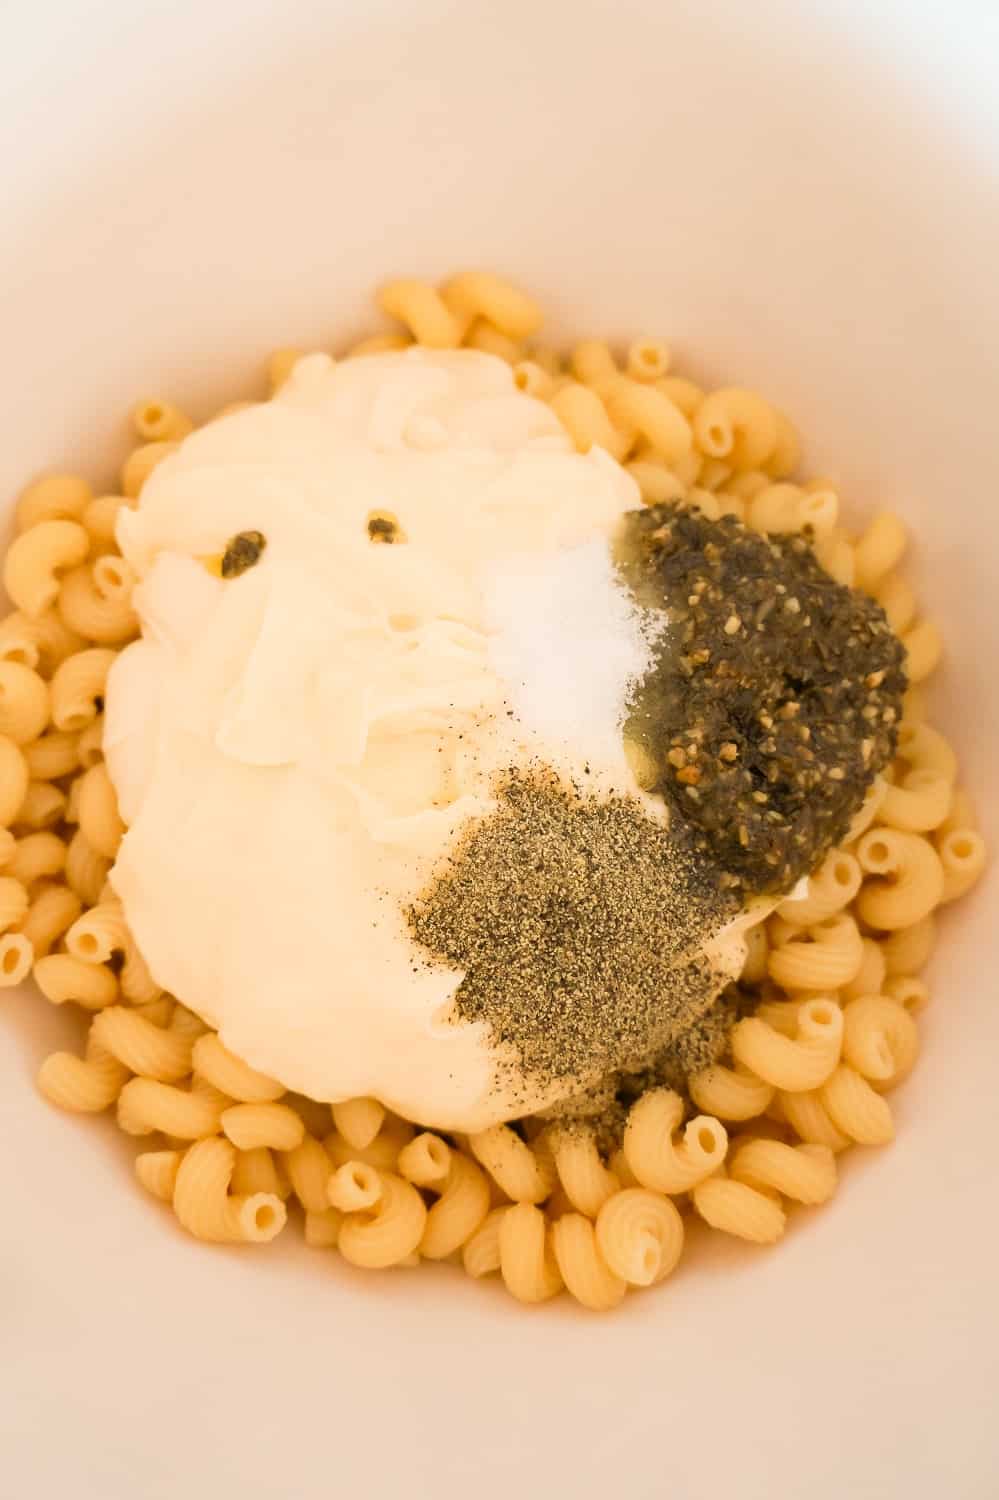 mayo, basil pesto, salt and pepper on top of cooked cavatappi noodles in a mixing bowl